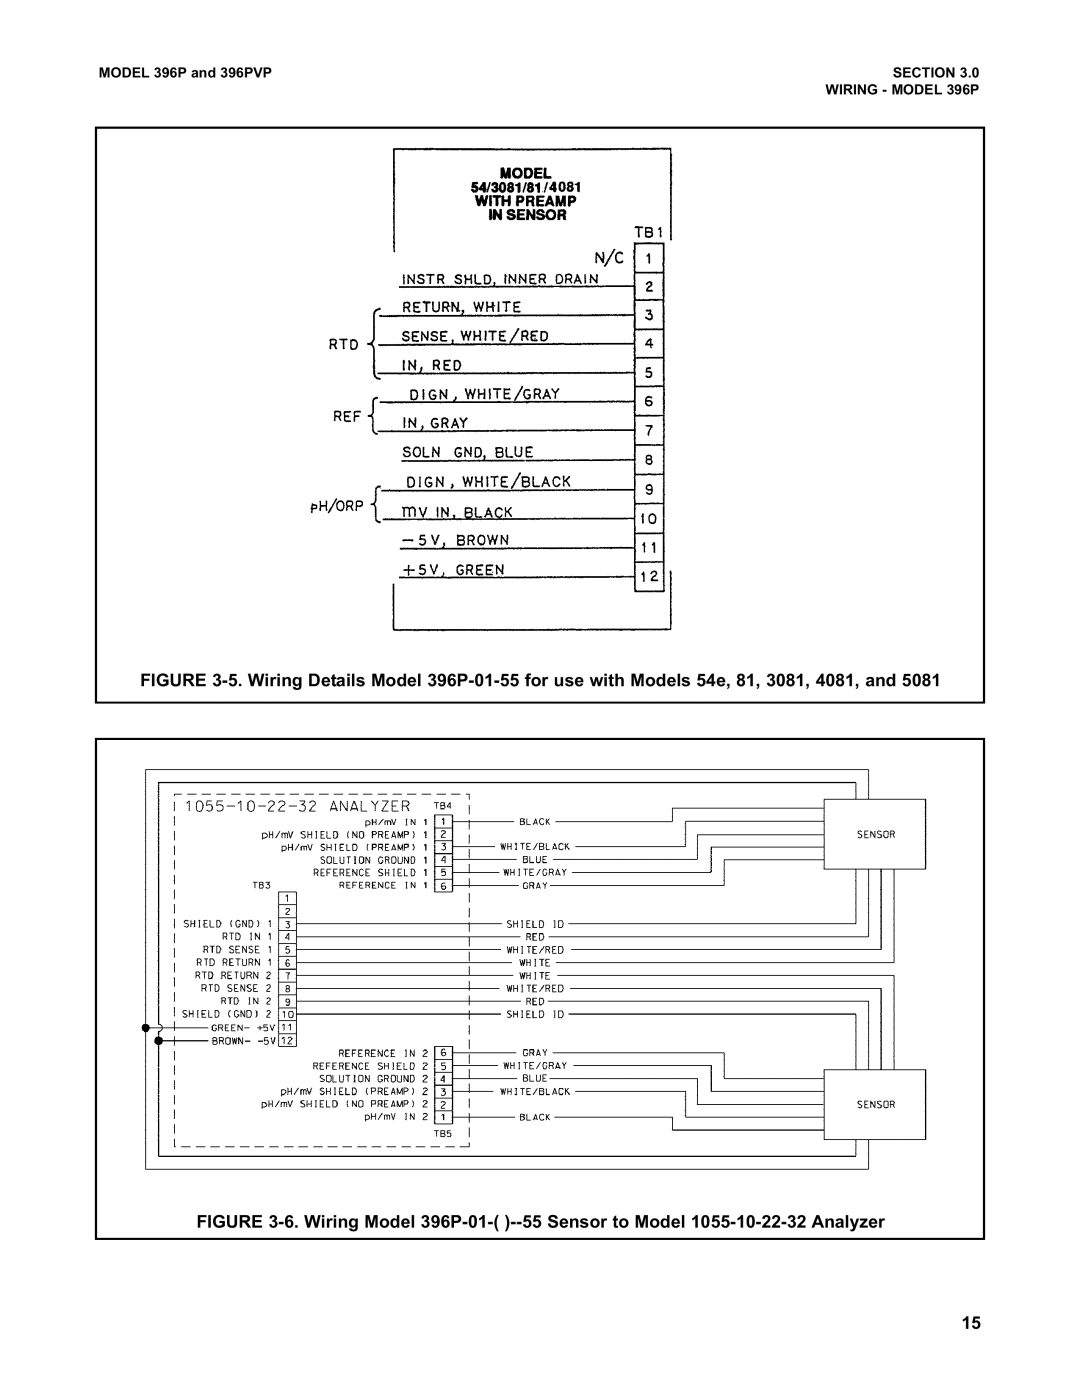 Emerson Process Management 396PVP 5.Wiring Details Model 396P-01-55for use with Models 54e, 81, 3081, 4081, and 